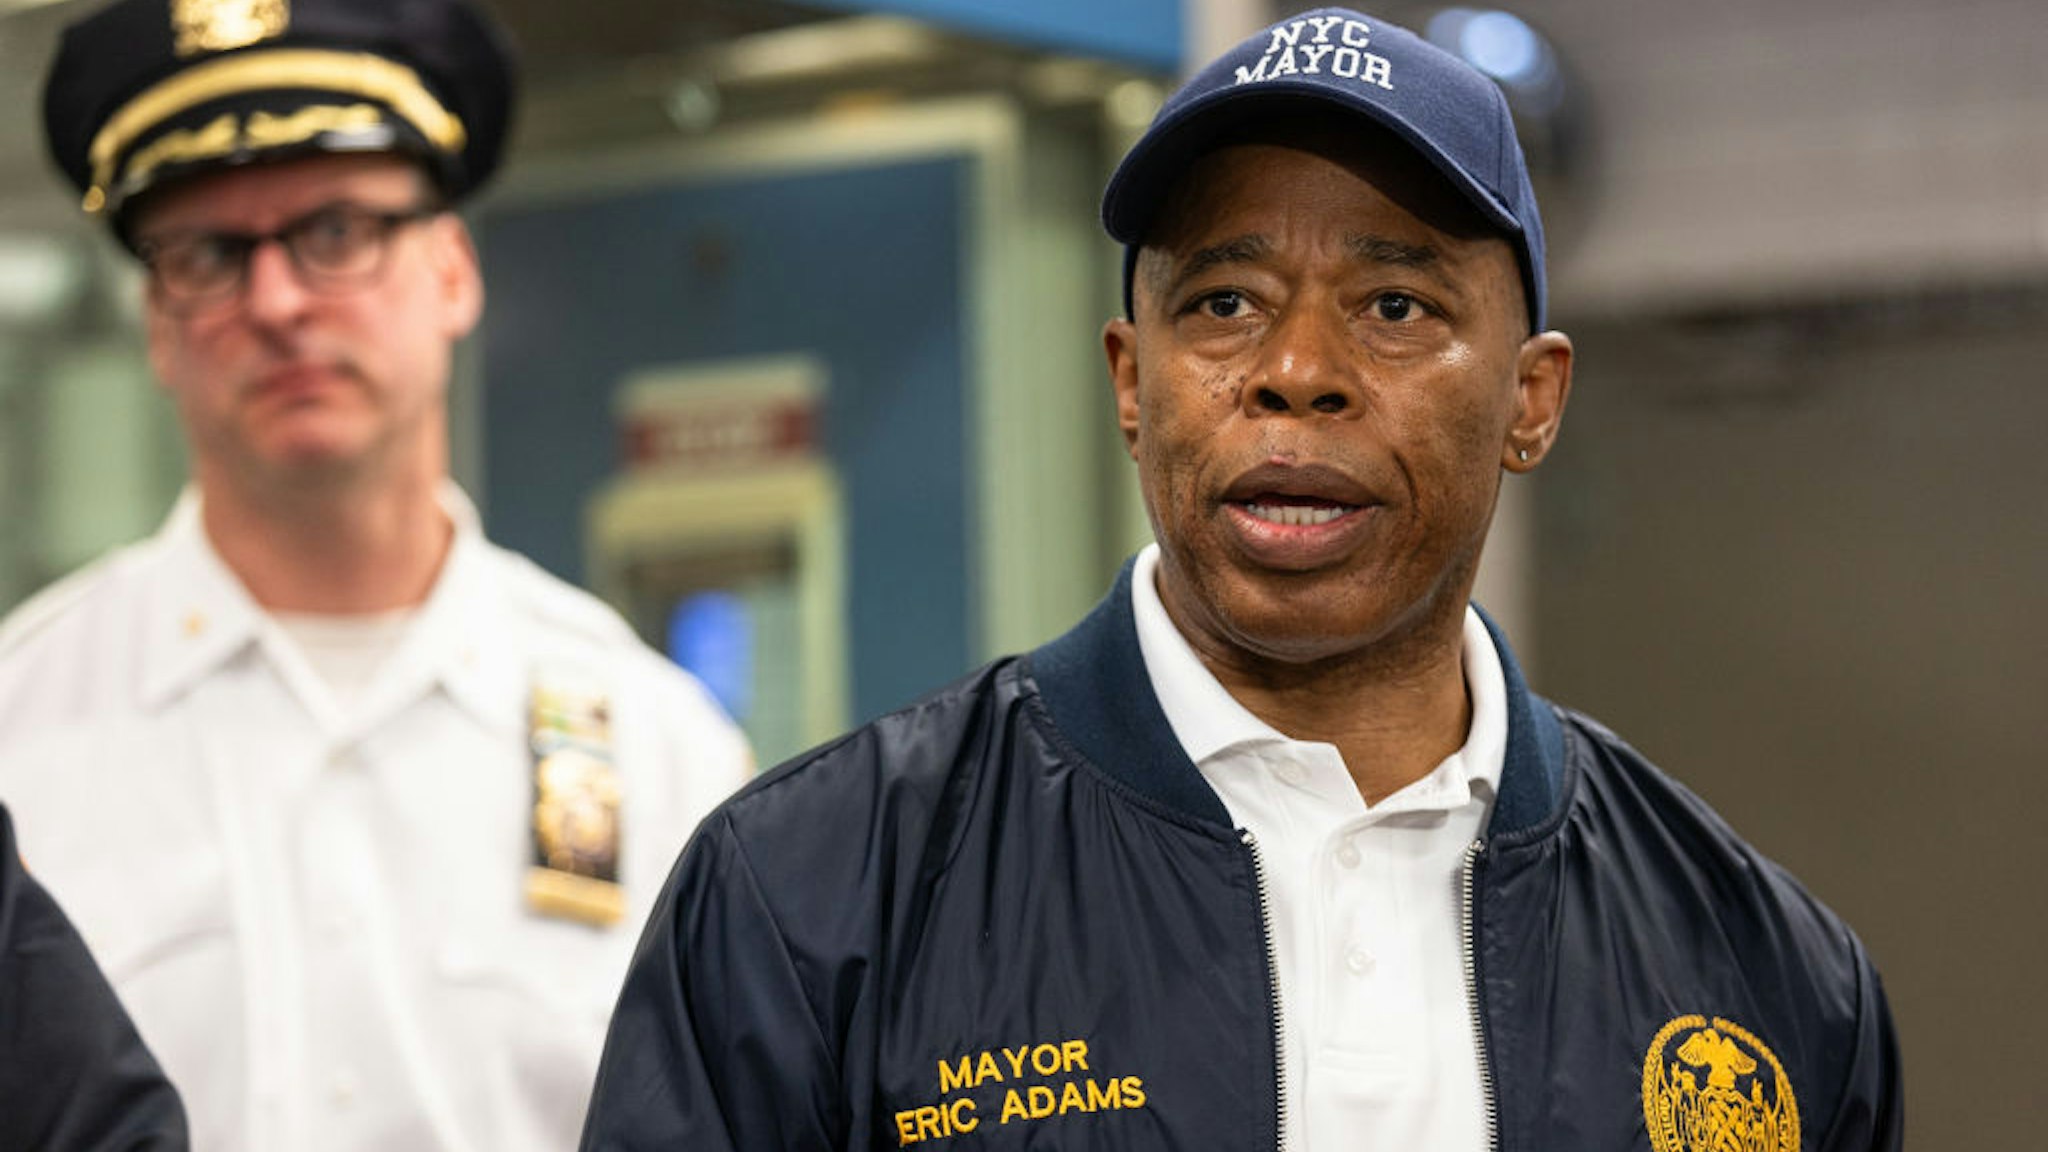 UNITED STATES -June 22: Mayor Eric Adams speaking to the press at the L stop Bushwick Ave-Aberdeen St. train station where one teenager was killed and another in stable condition after train surfing, Brooklyn, New York, Thursday, June 22, 2023.